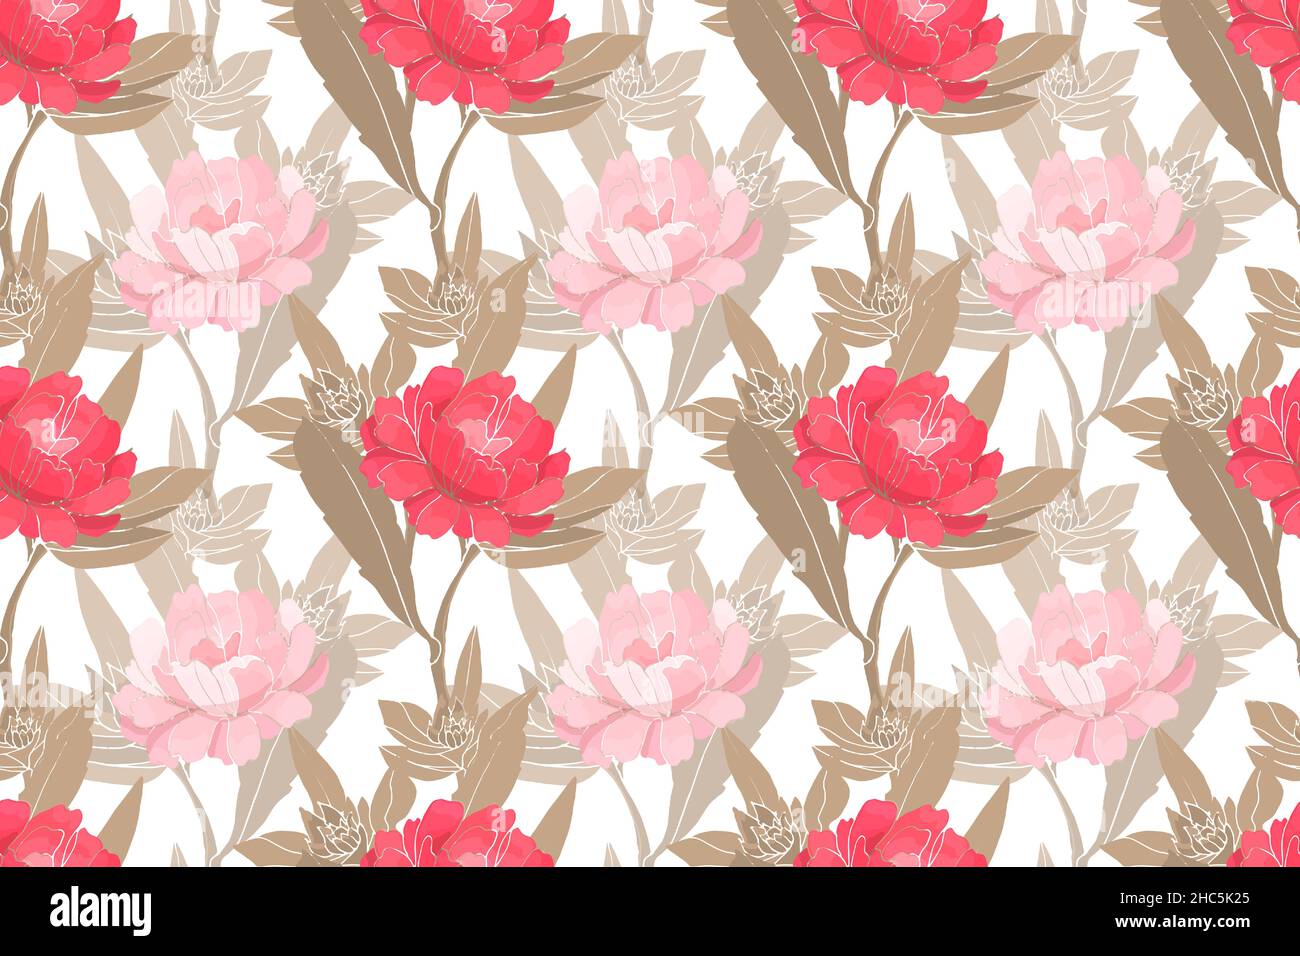 Art floral vector seamless pattern with peonies. Stock Vector